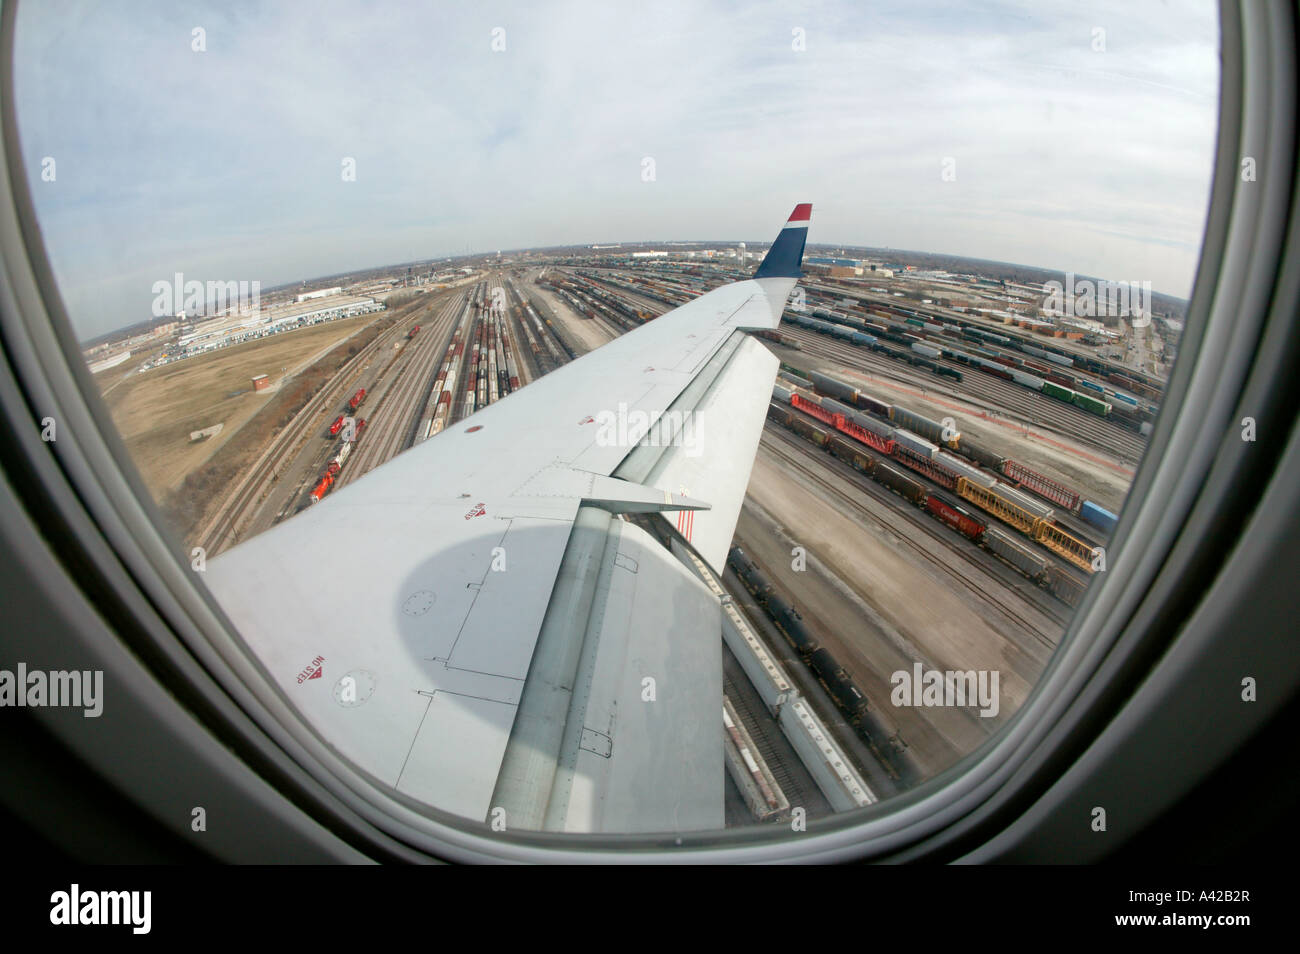 View out of an airplane window of a train yard and the plane wing with the flaps down Stock Photo